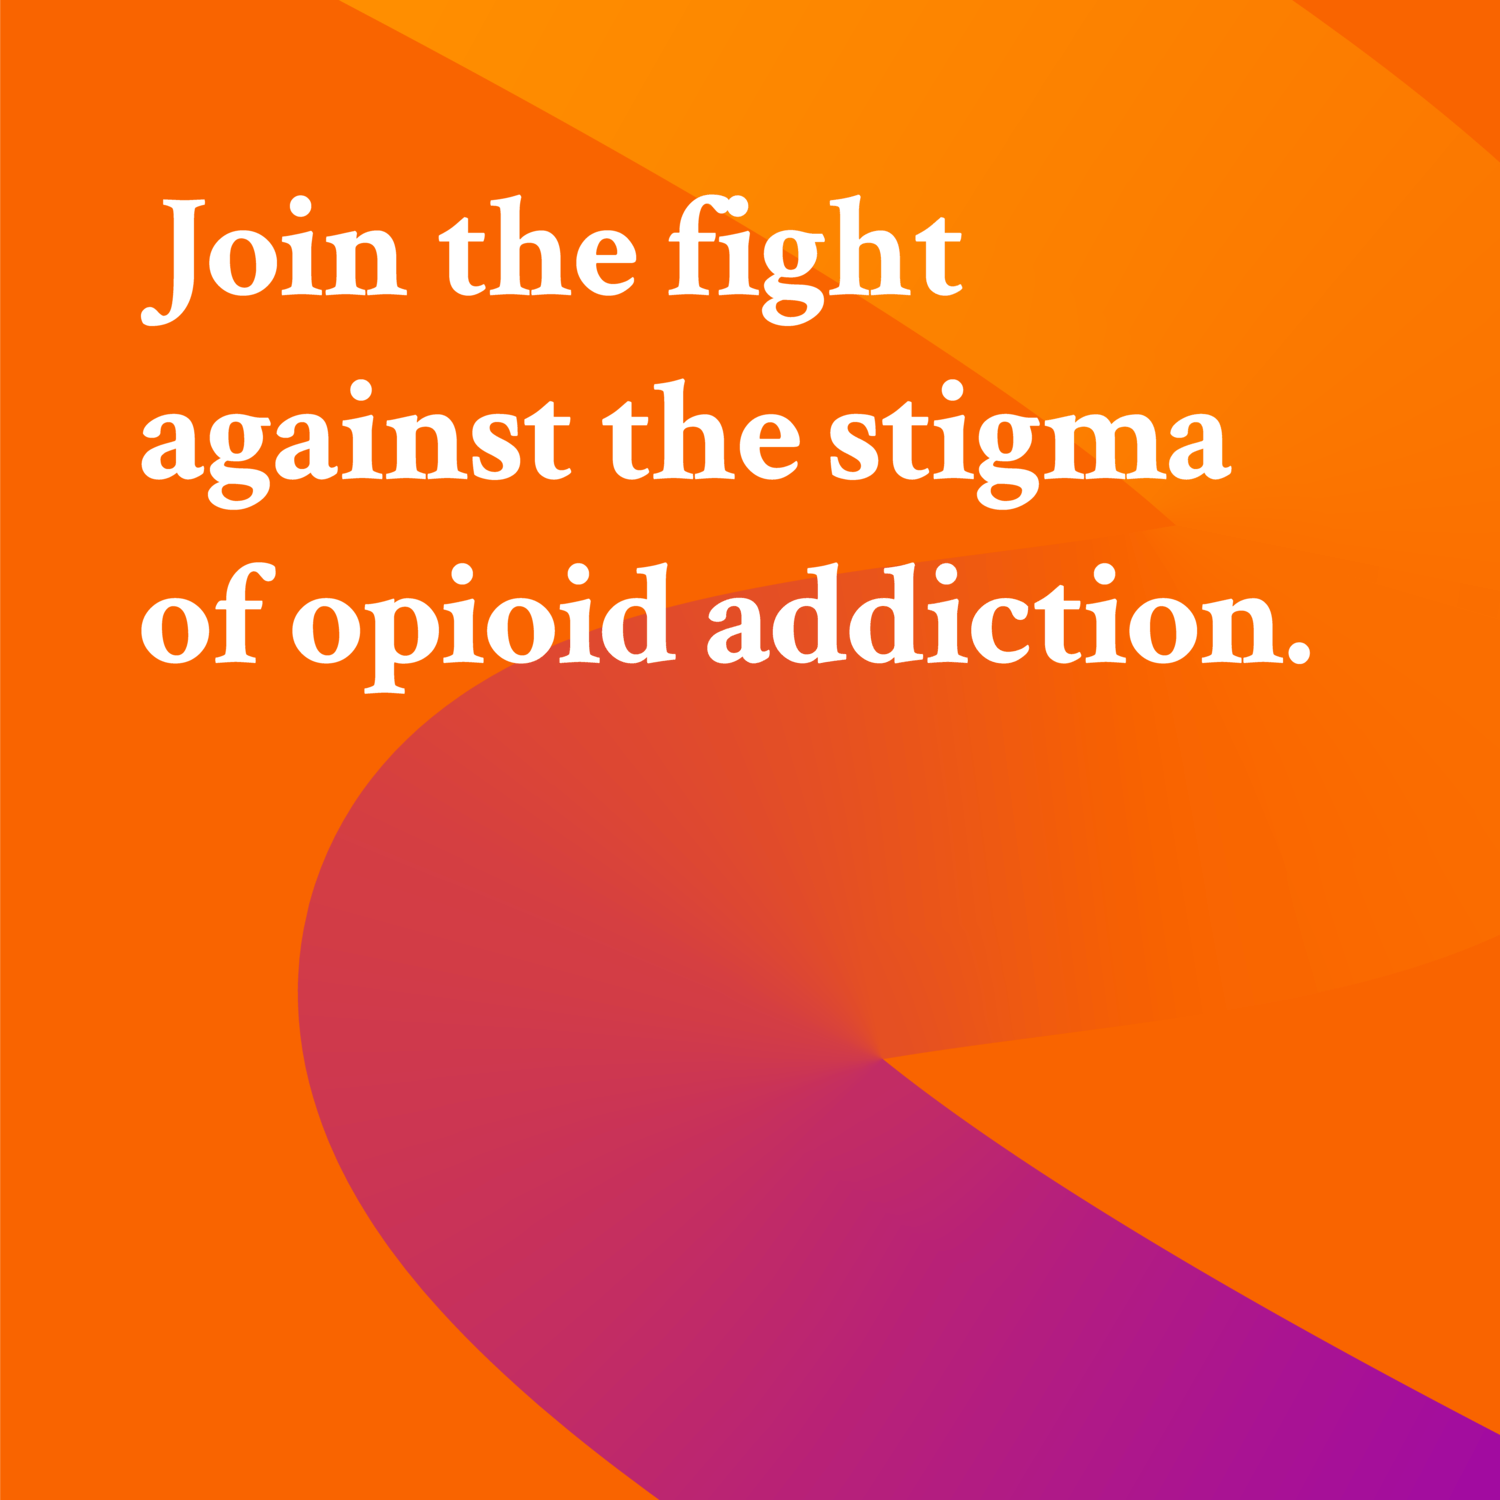 Join the fight against the stigma of opioid addiction